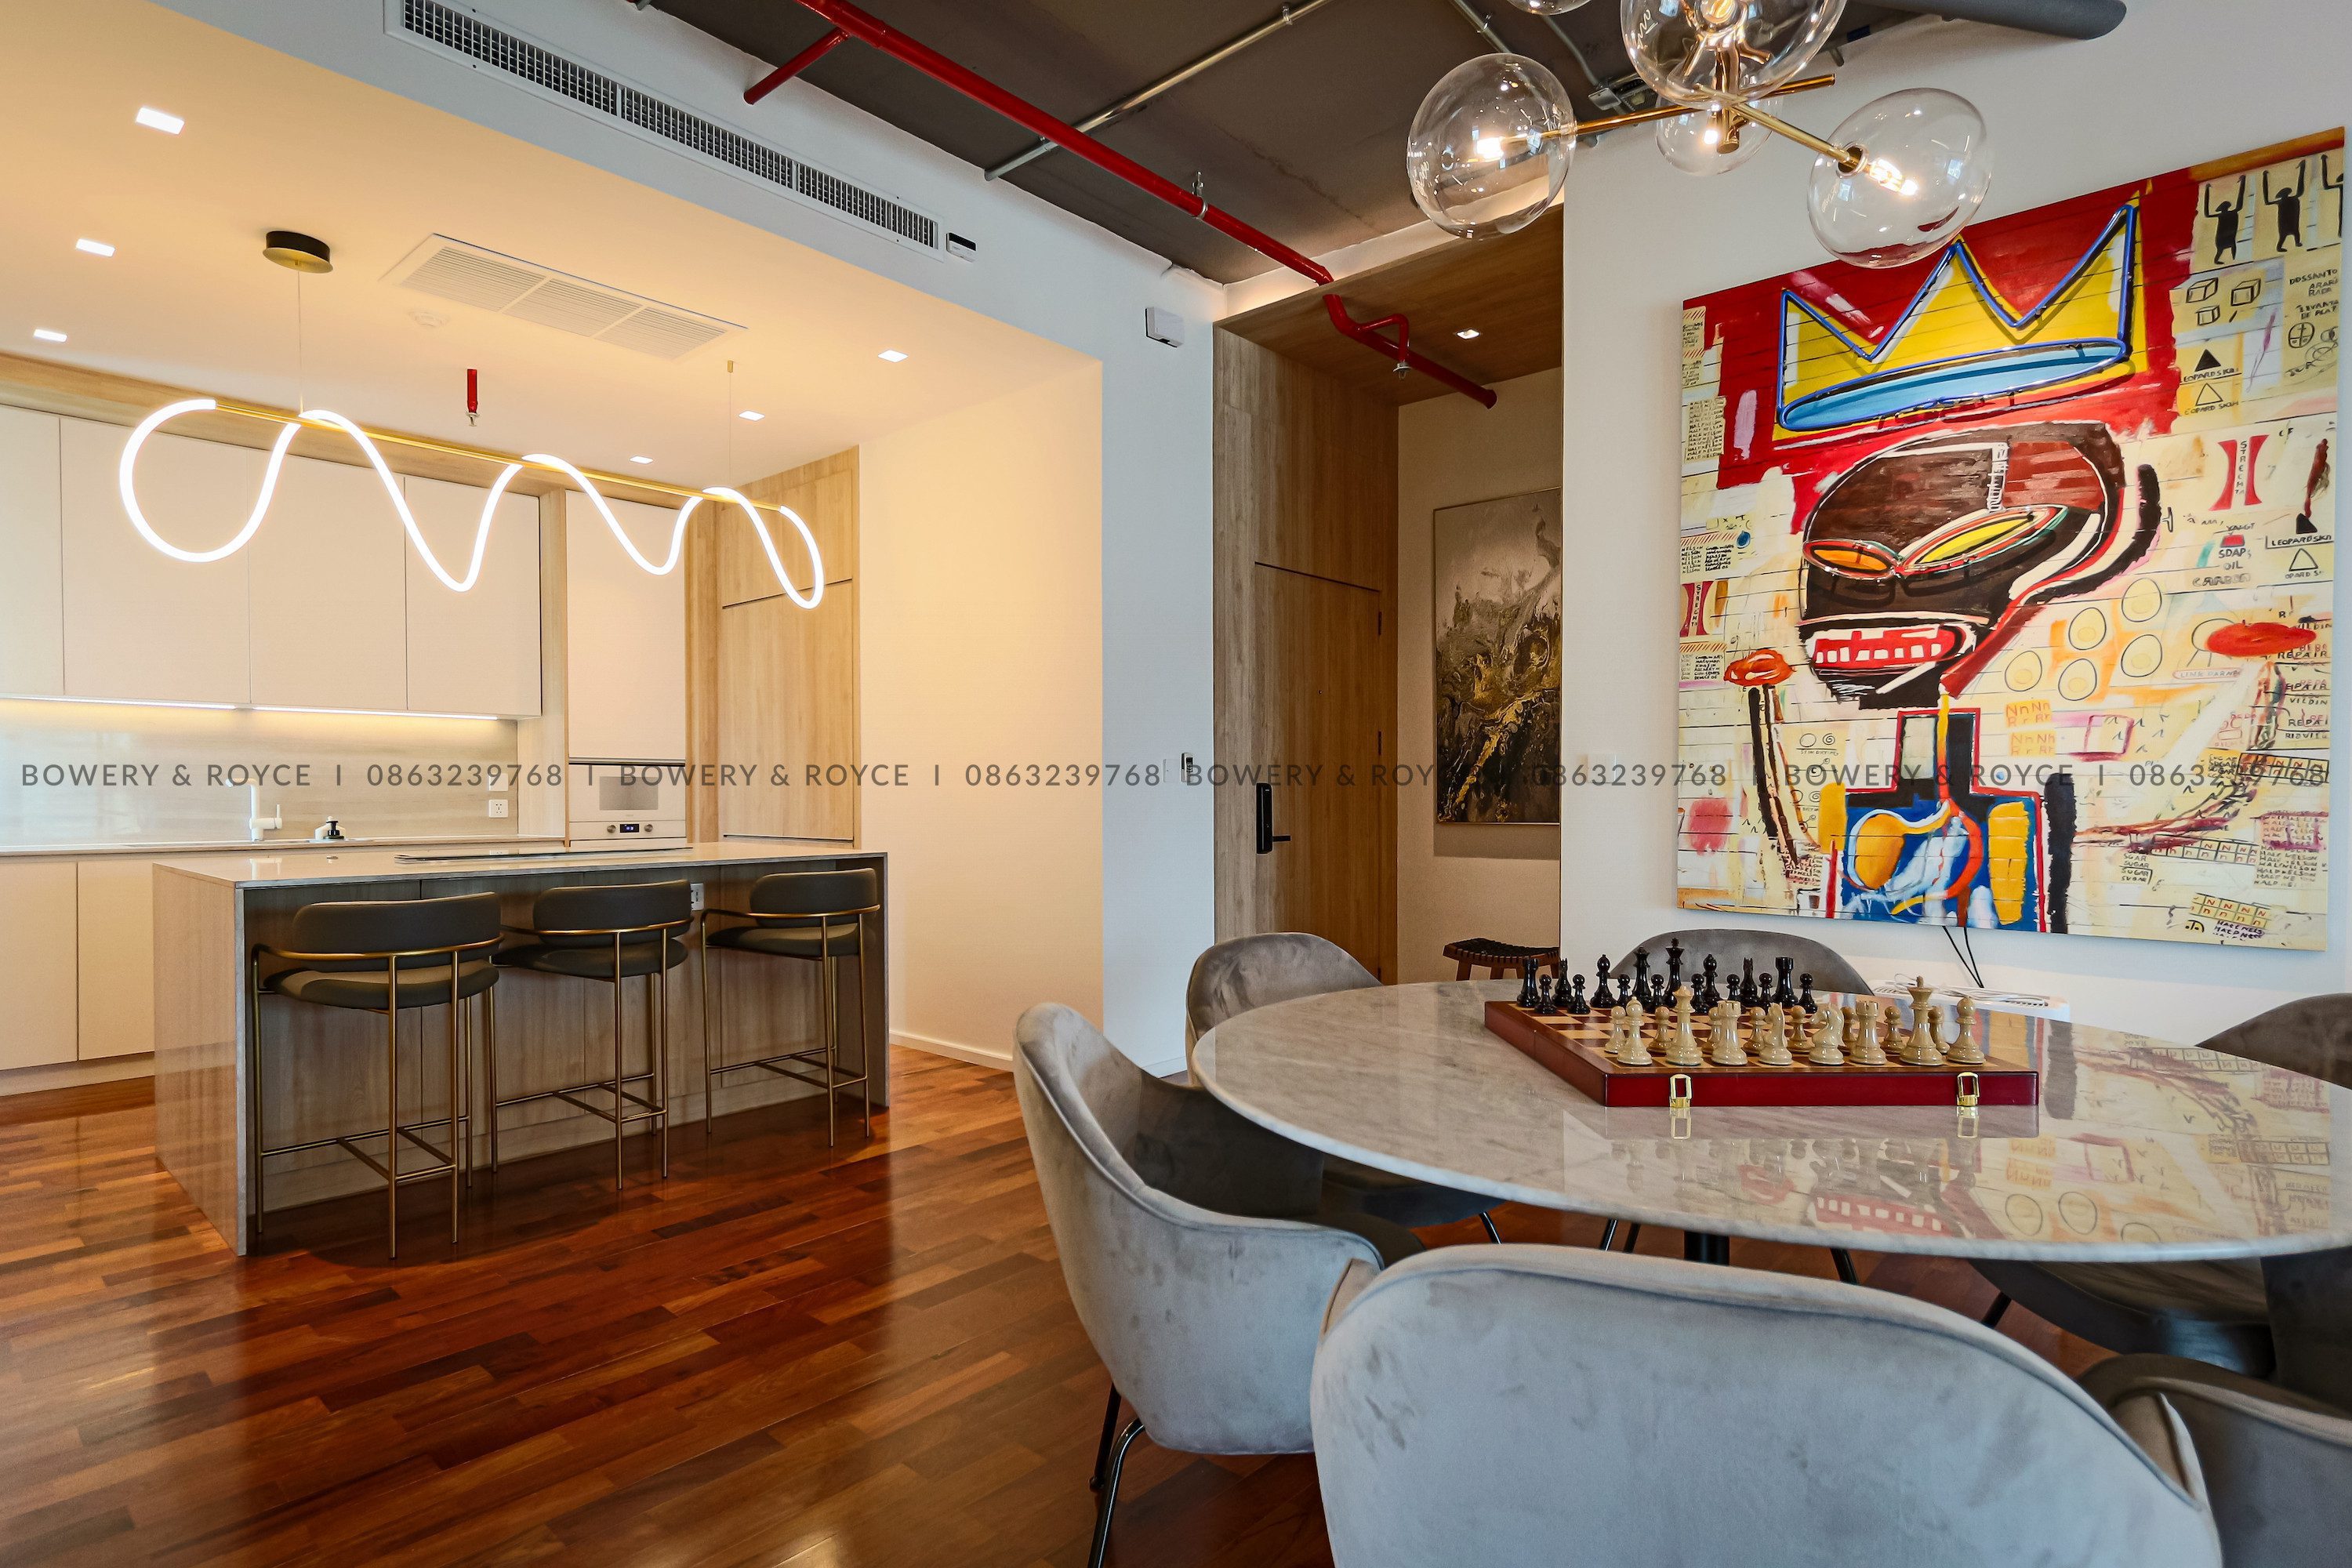 Modern Loft Style Two Bedroom Condo for Sale by Bowery & Royce